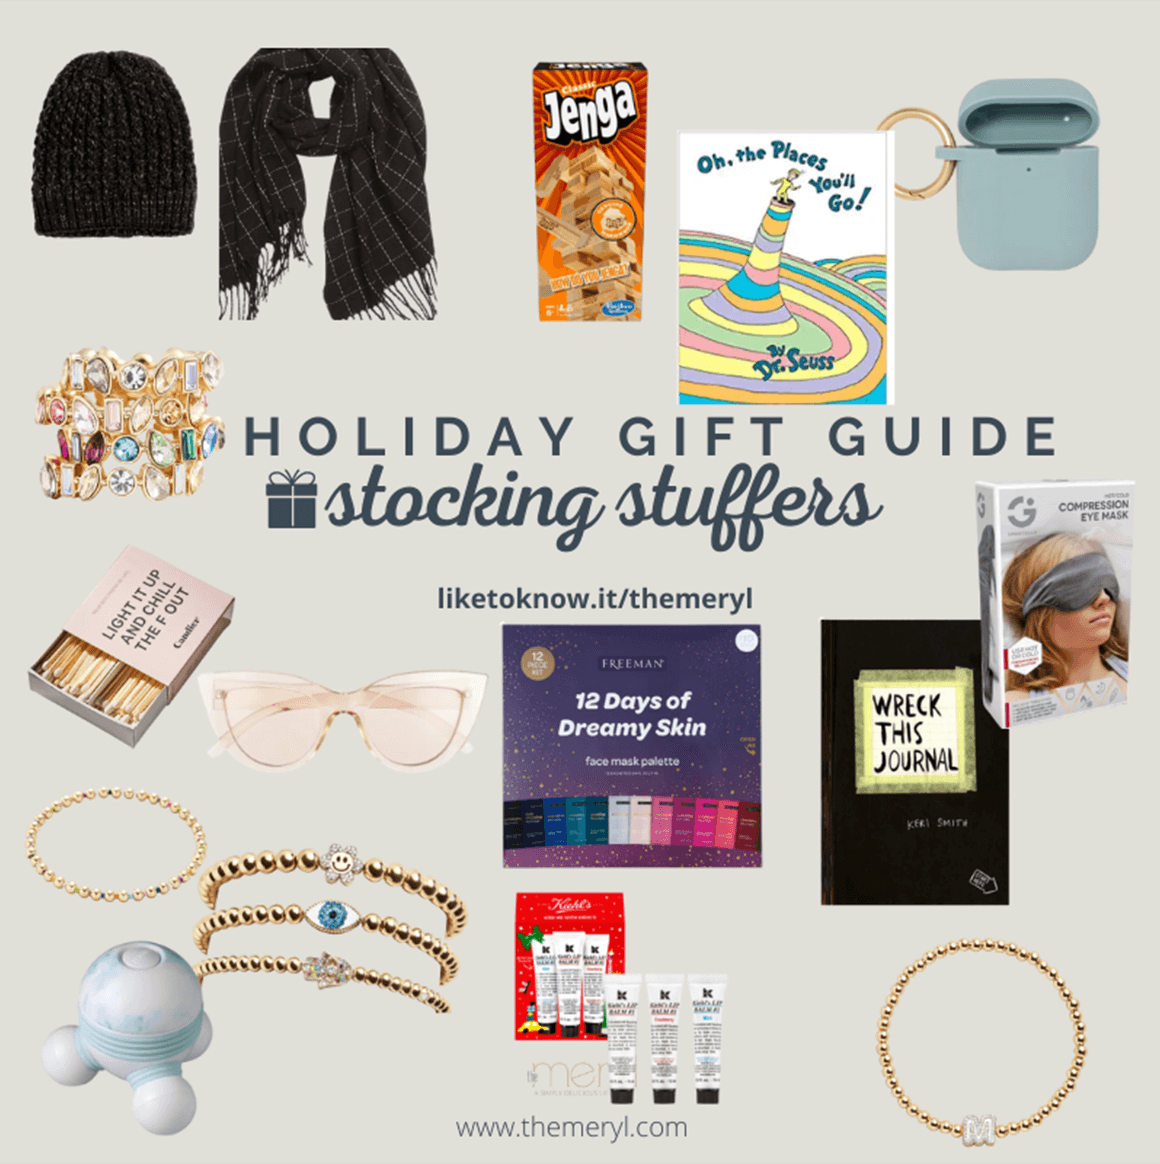 Holiday Gift Guides are Here Gal Stocking Stuffers